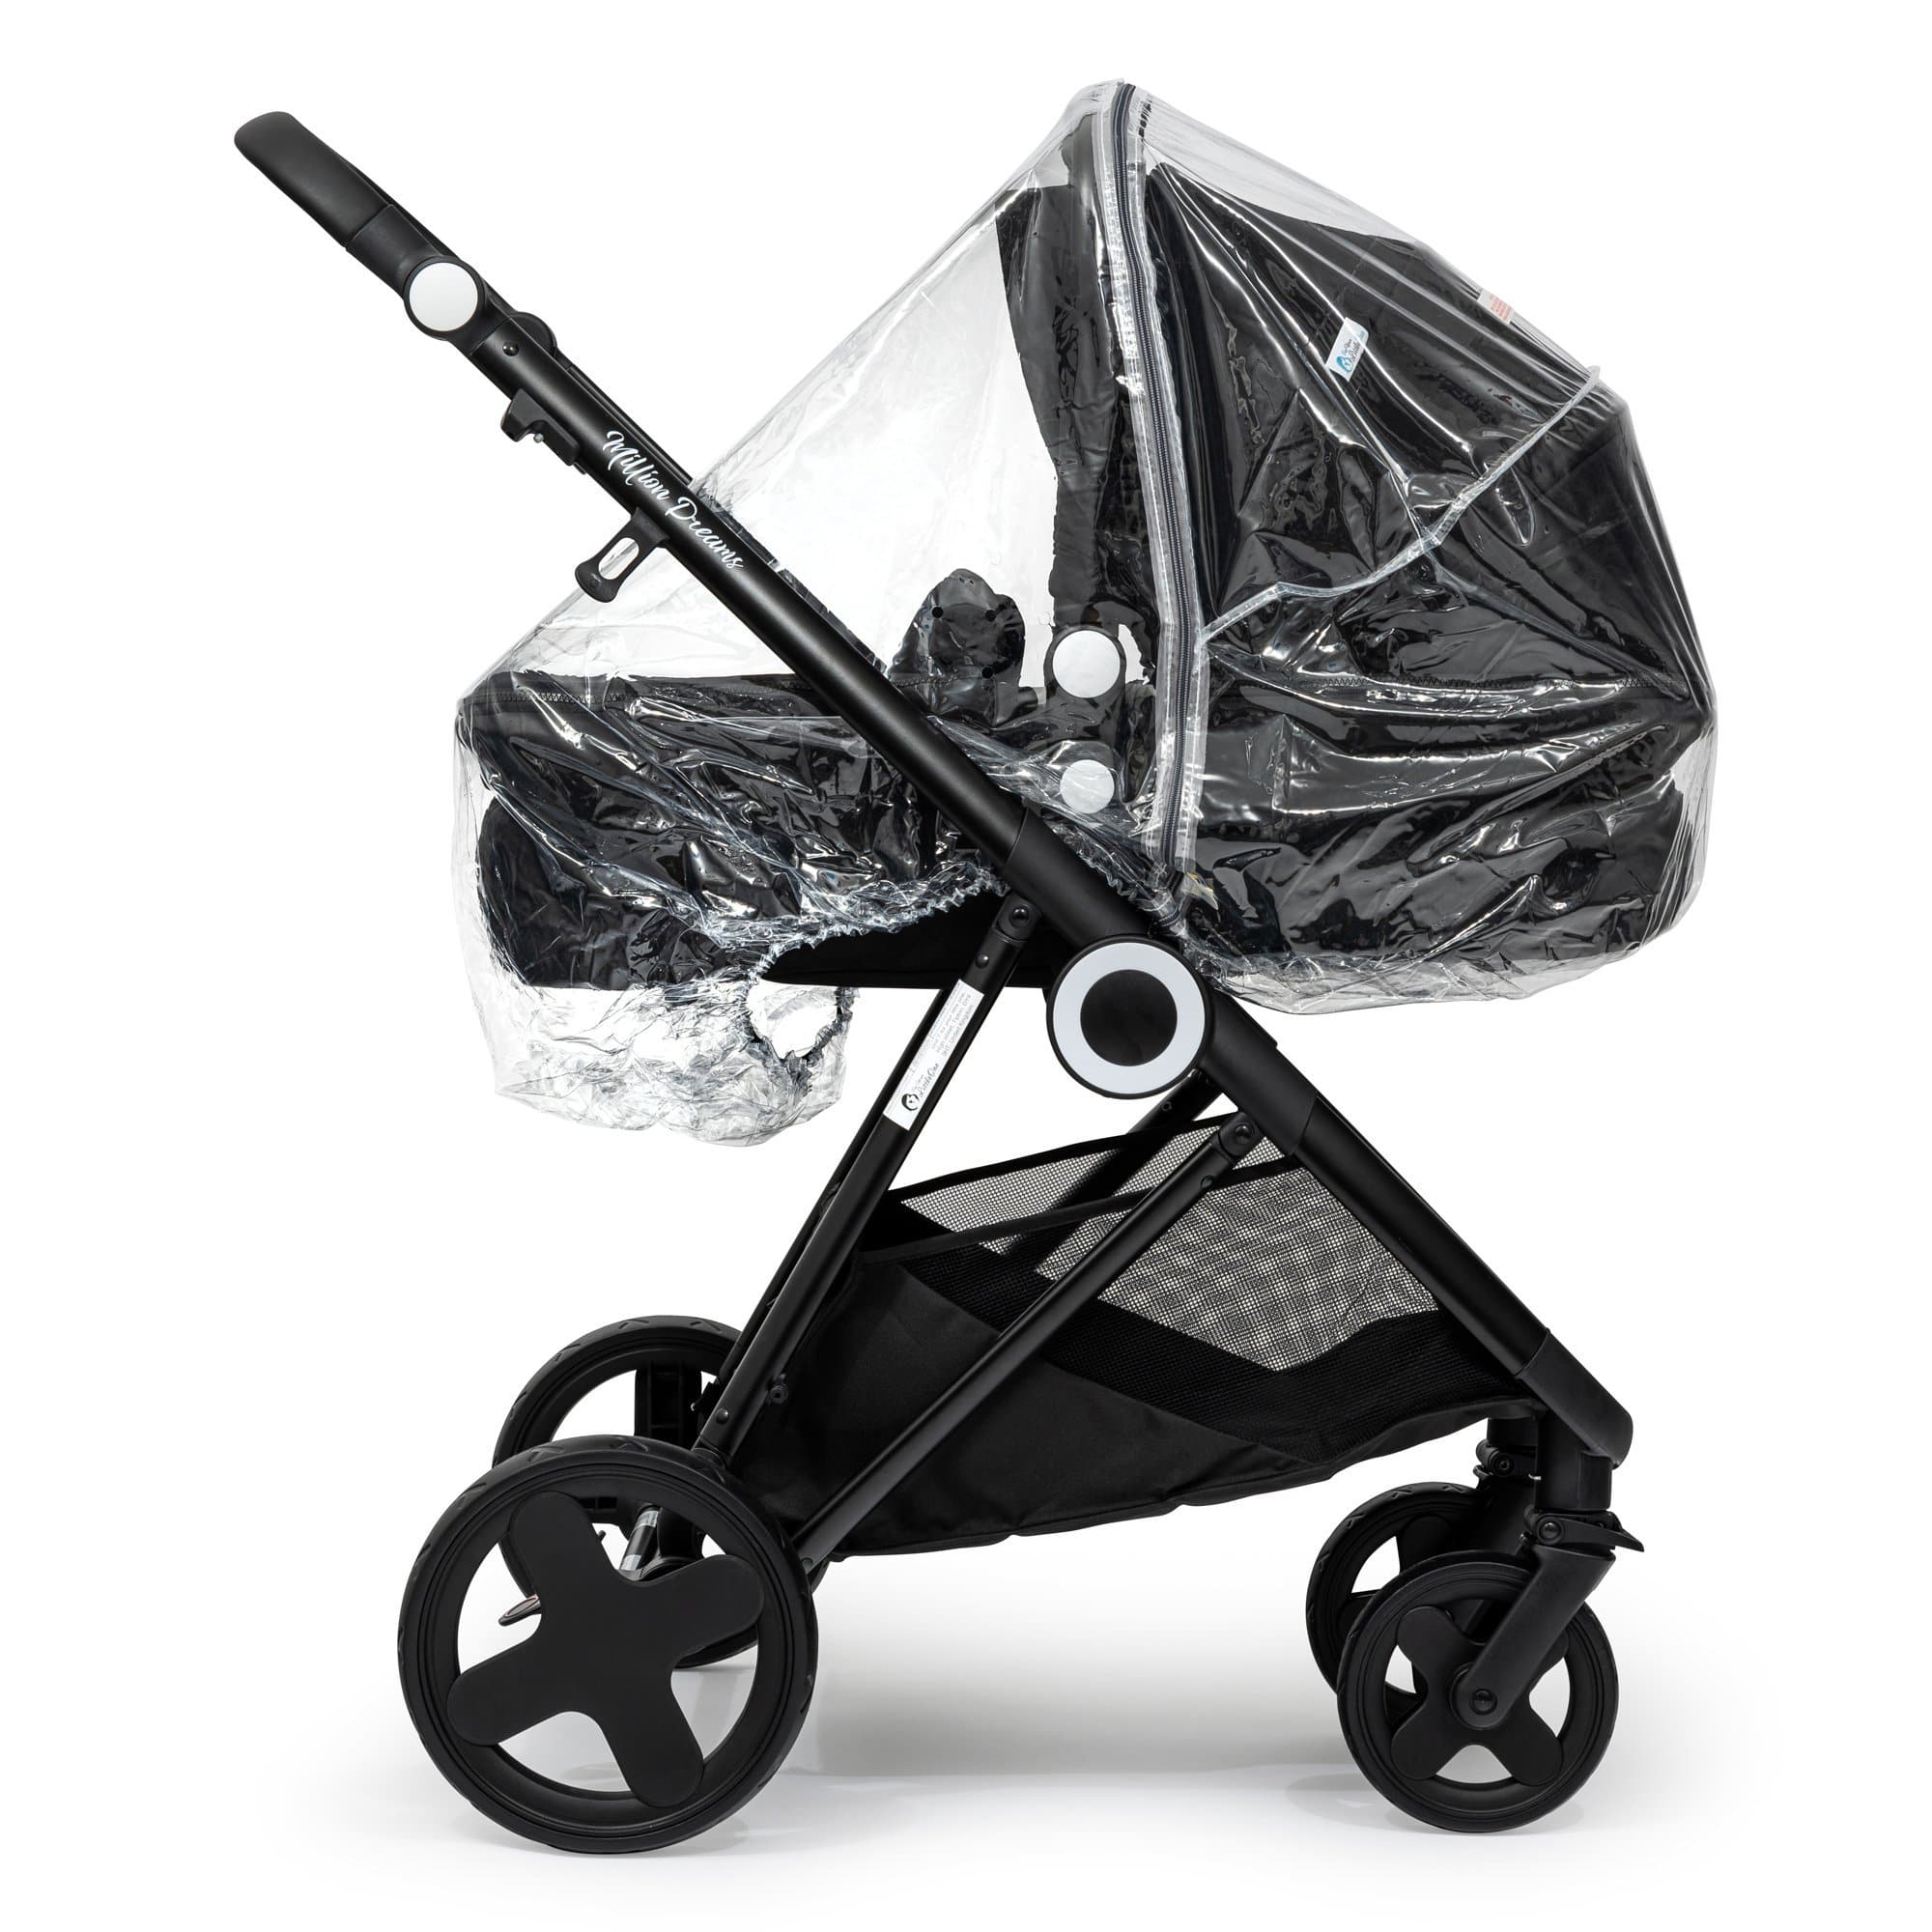 2 in 1 Rain Cover Compatible with Bebecar - Fits All Models - For Your Little One